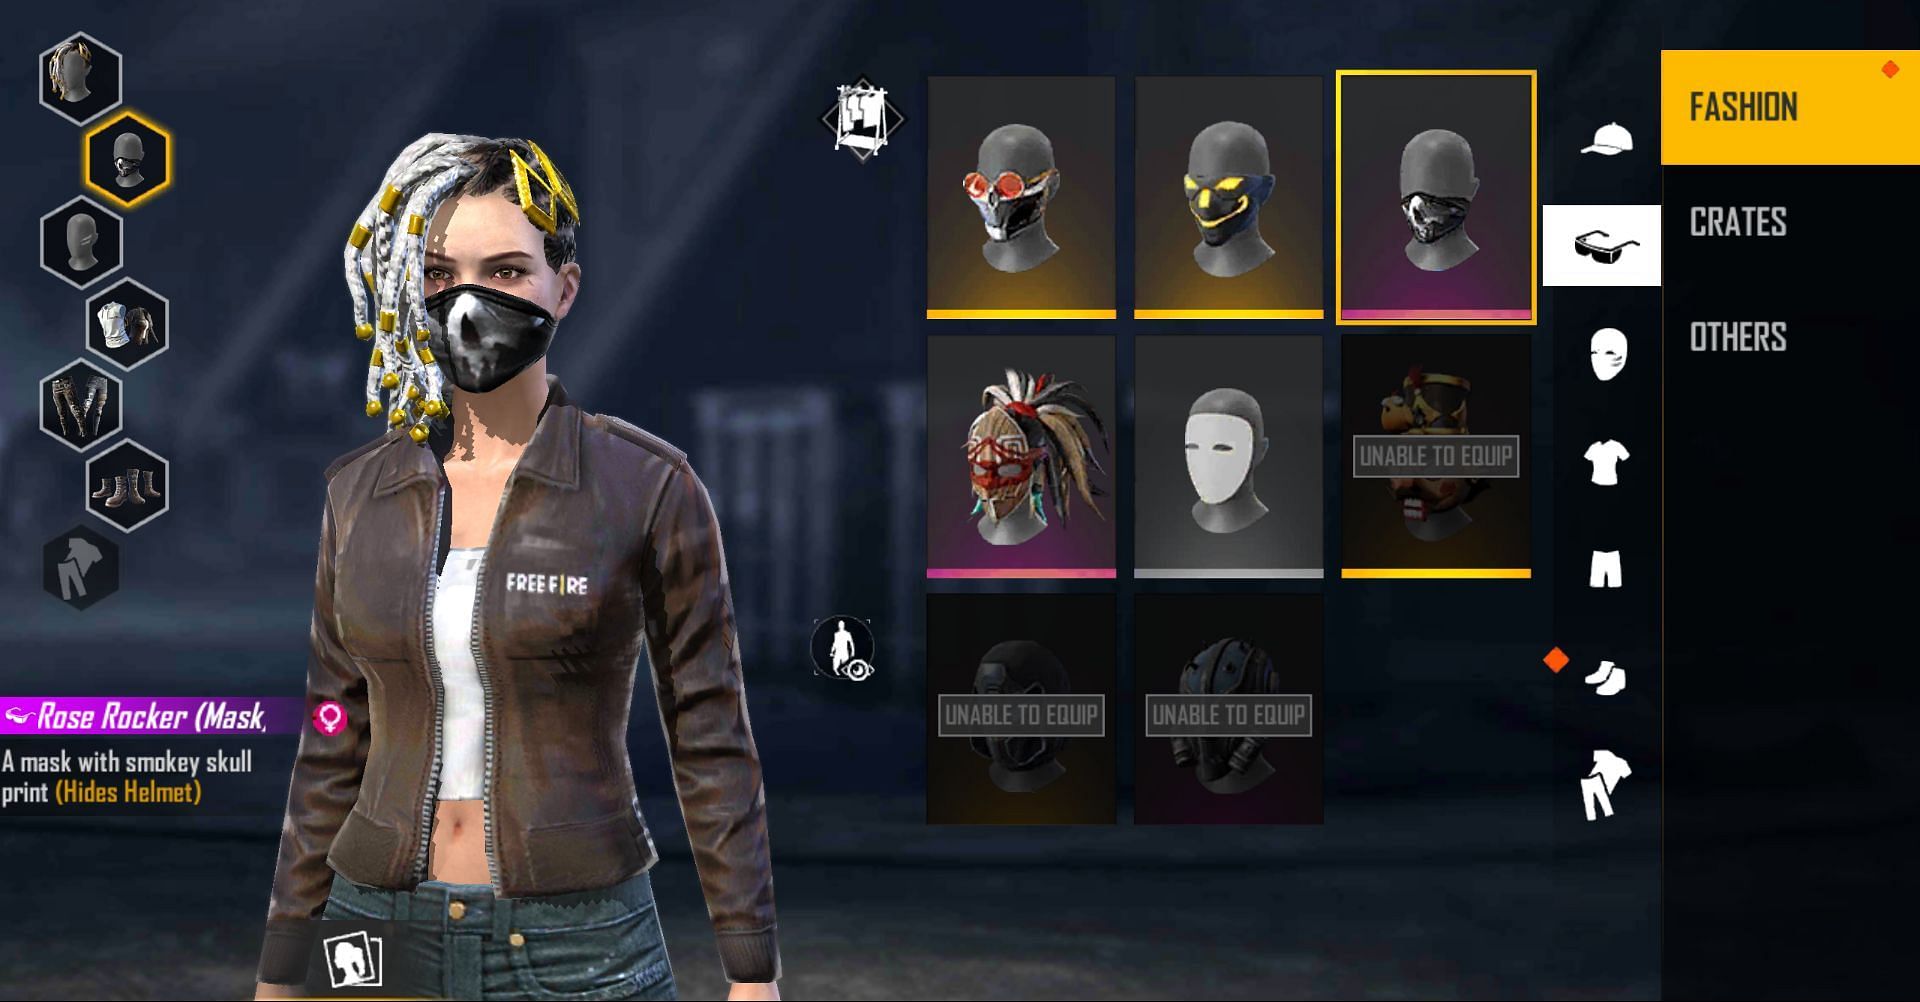 The Black Rose Rocker (Mask) is only for players on the Indonesia server (Image via Free Fire)